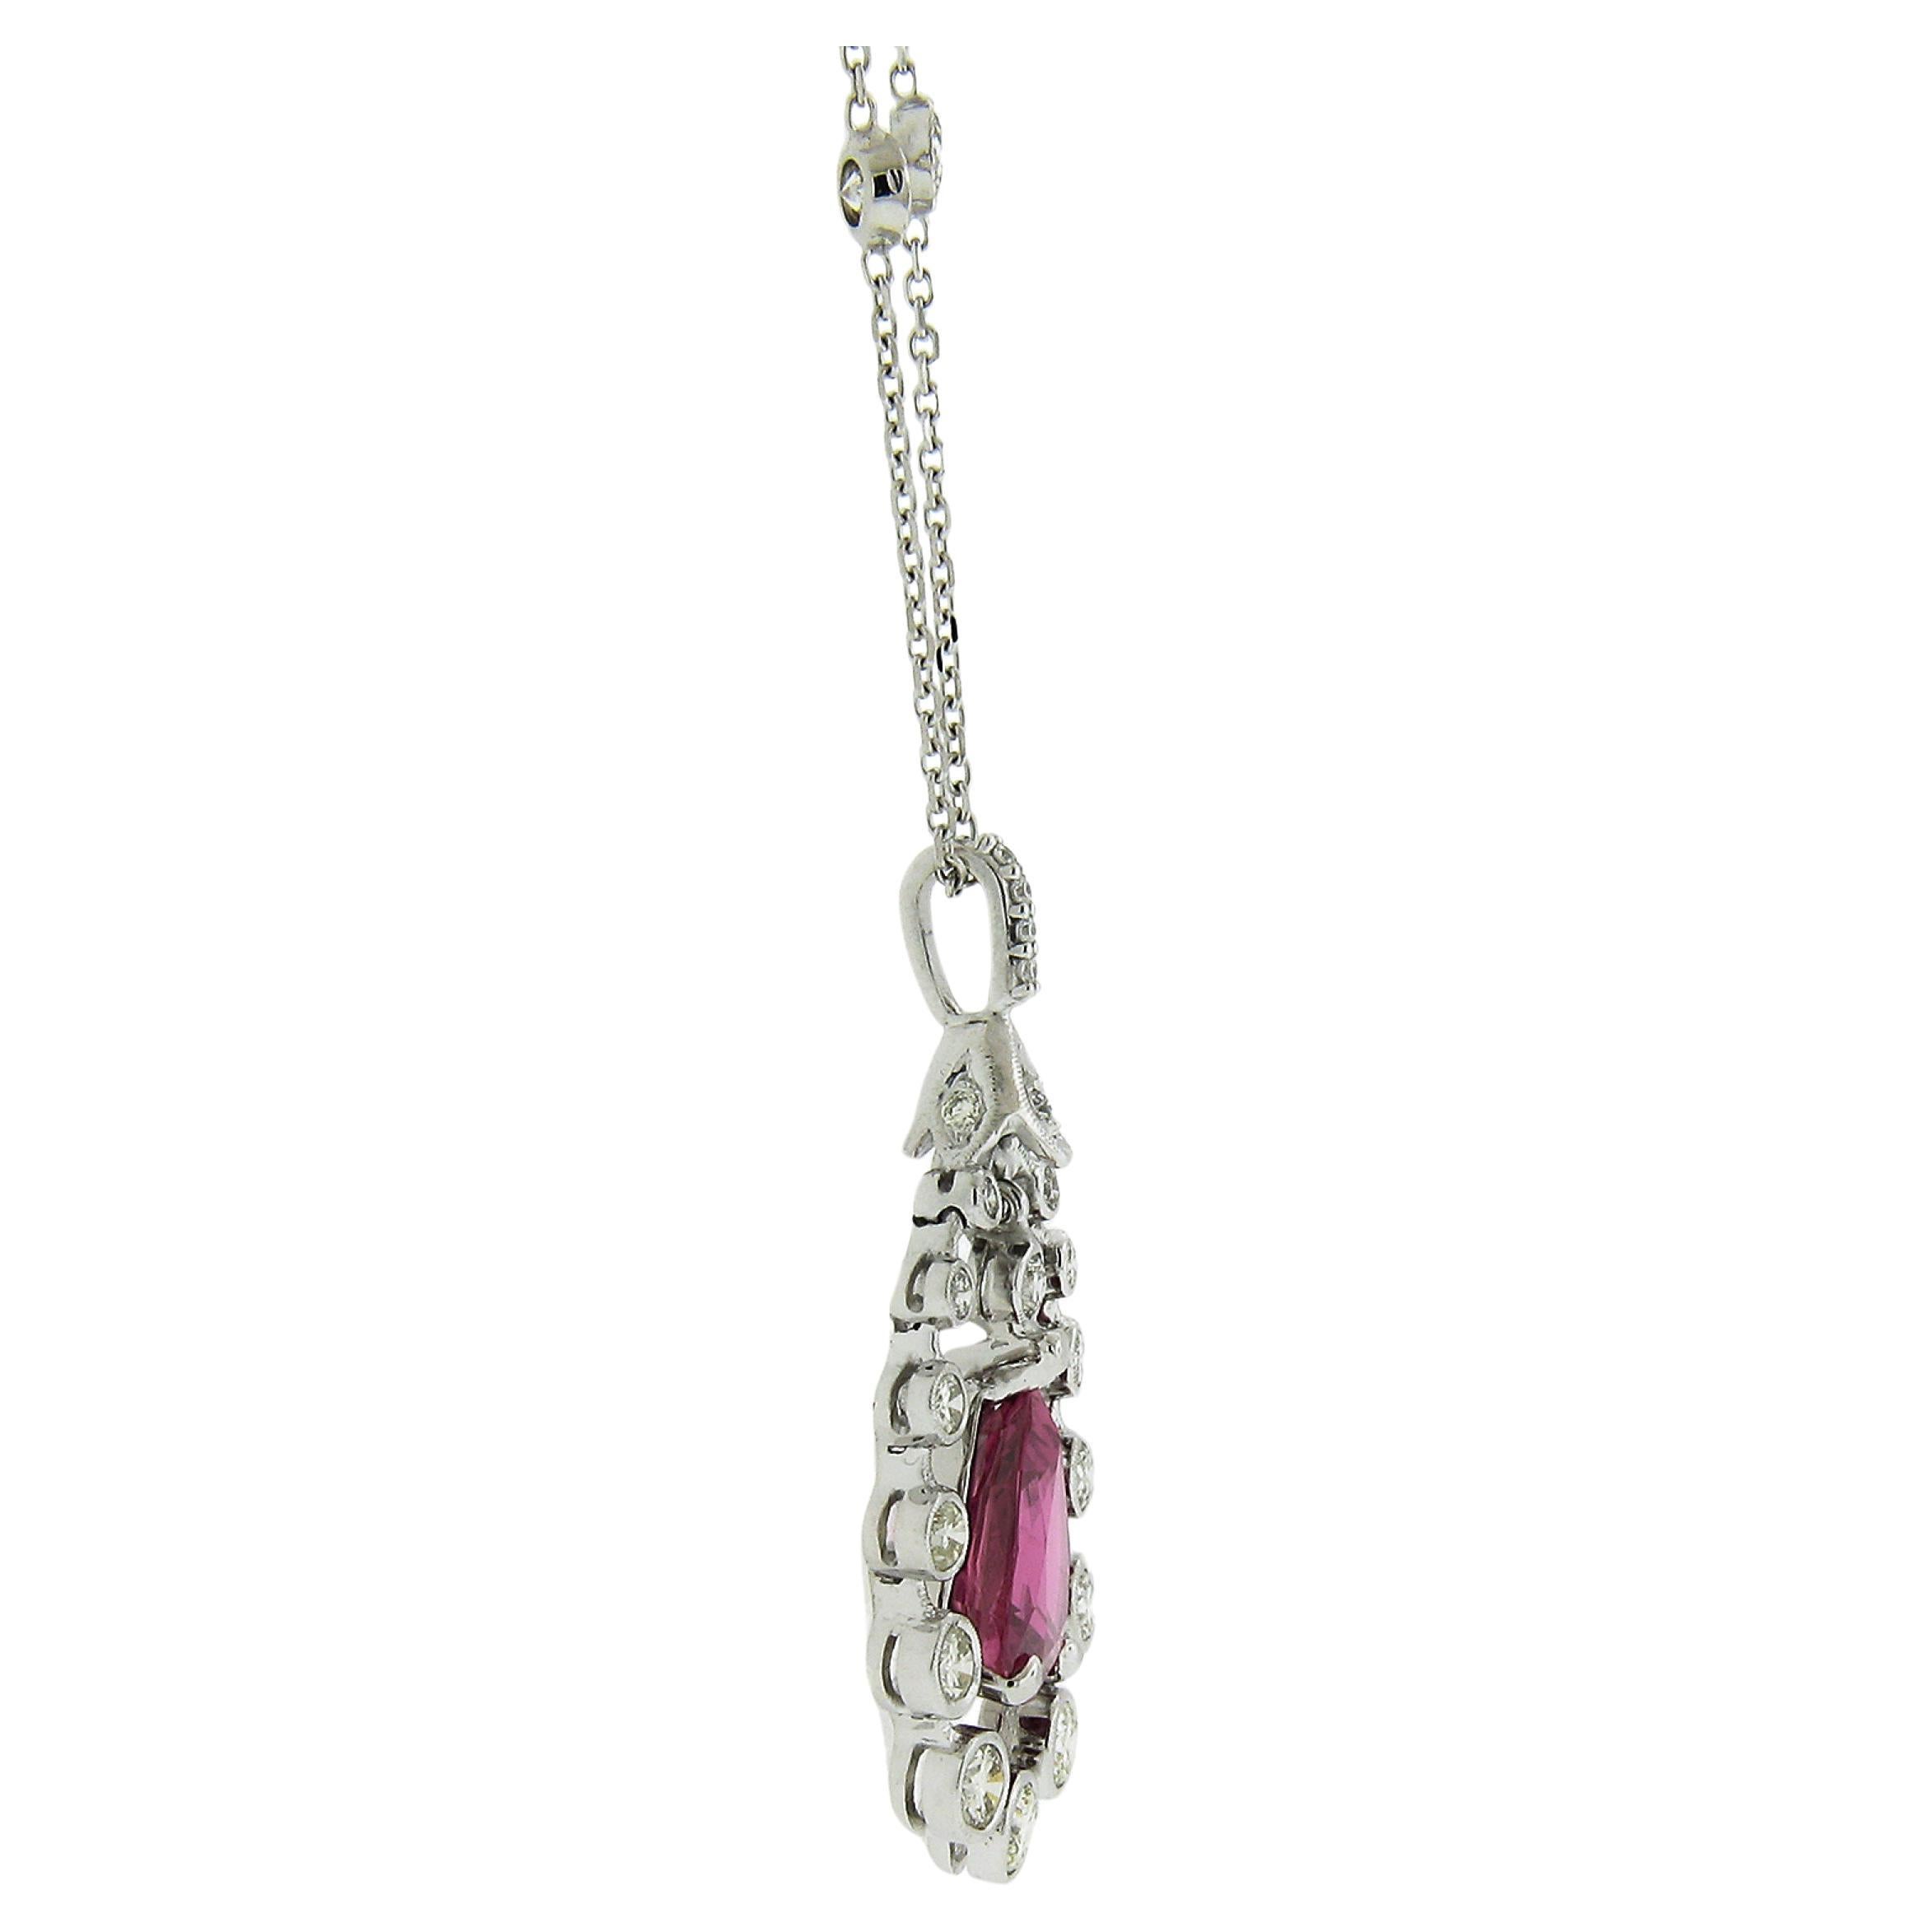 This classy and elegant necklace features an incredible teardrop pear cut ruby that dangles at the center of the diamond halo. The halo is flexible in design and gives this piece its special visual effects. The pendant slides on a fancy diamond by